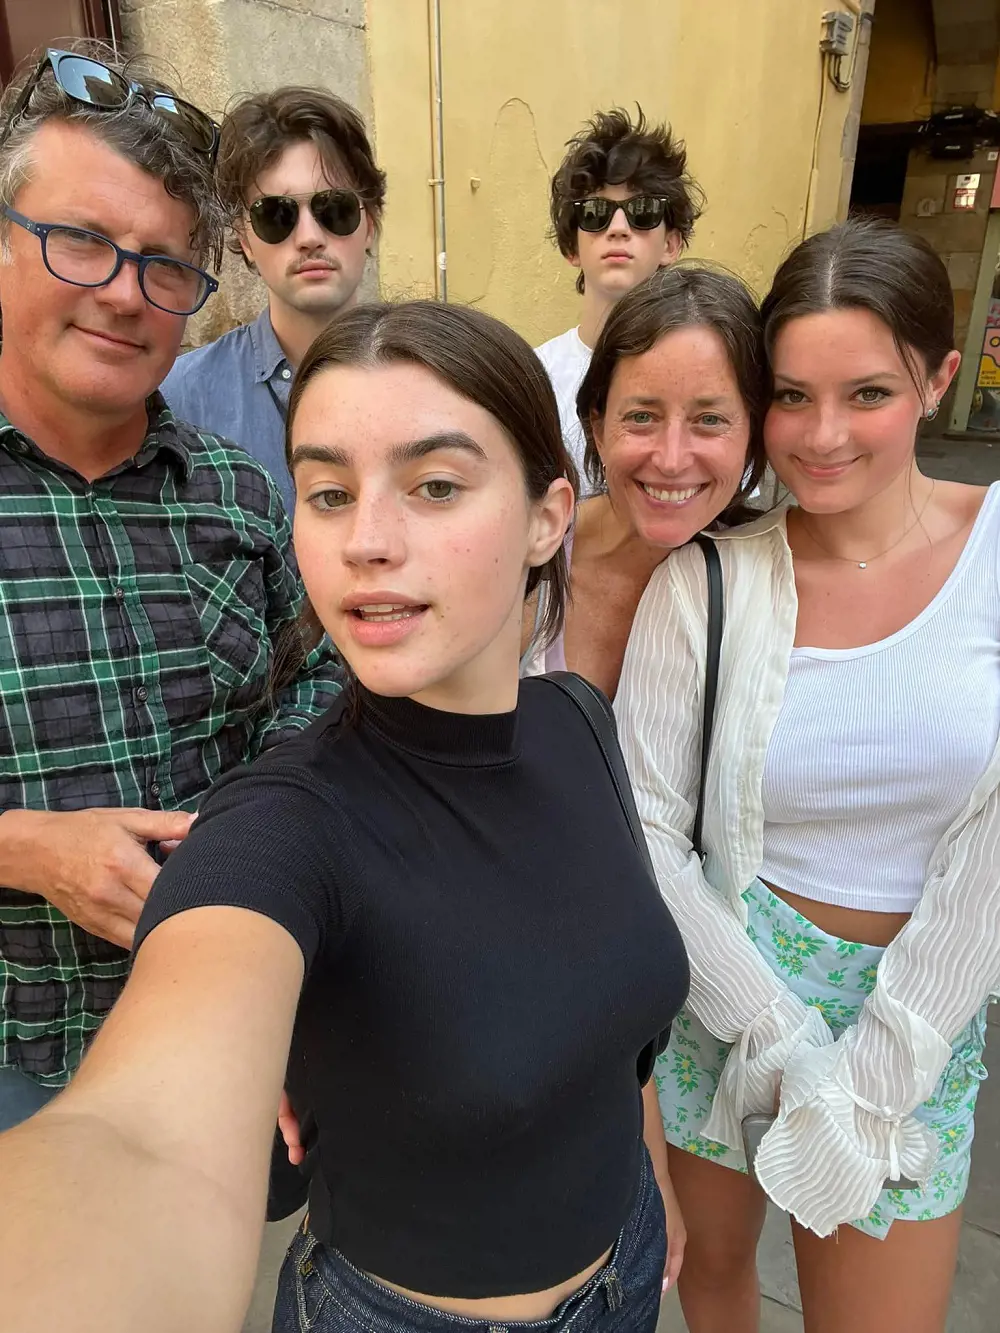 Audrey with her family enjoying their holidays together on June 18, 2022